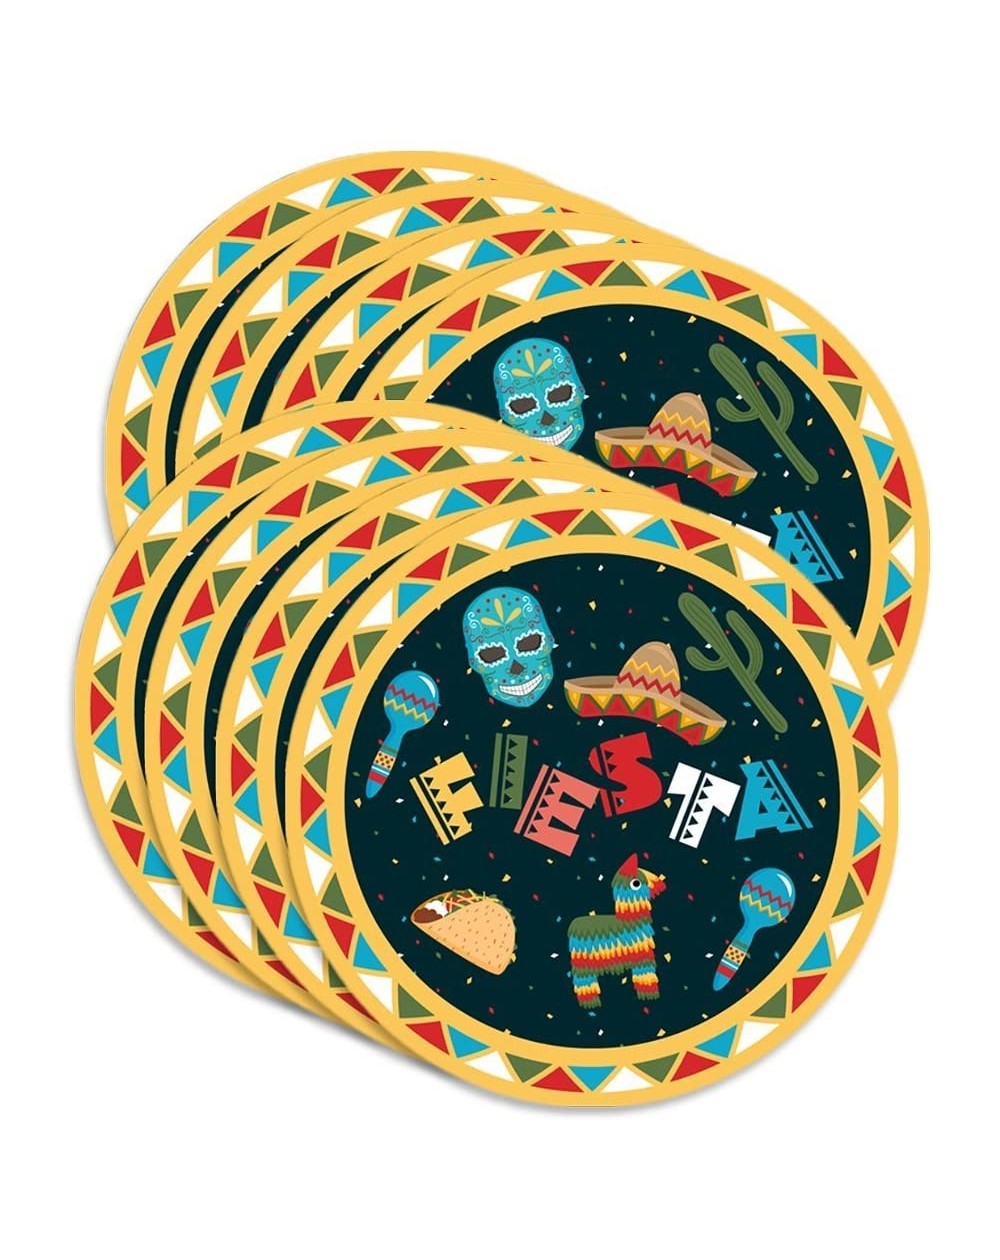 Party Packs Mexican Fiesta Birthday Party Supplies Large 9" Plates 80pcs Value Pack - C118N9S5485 $16.78